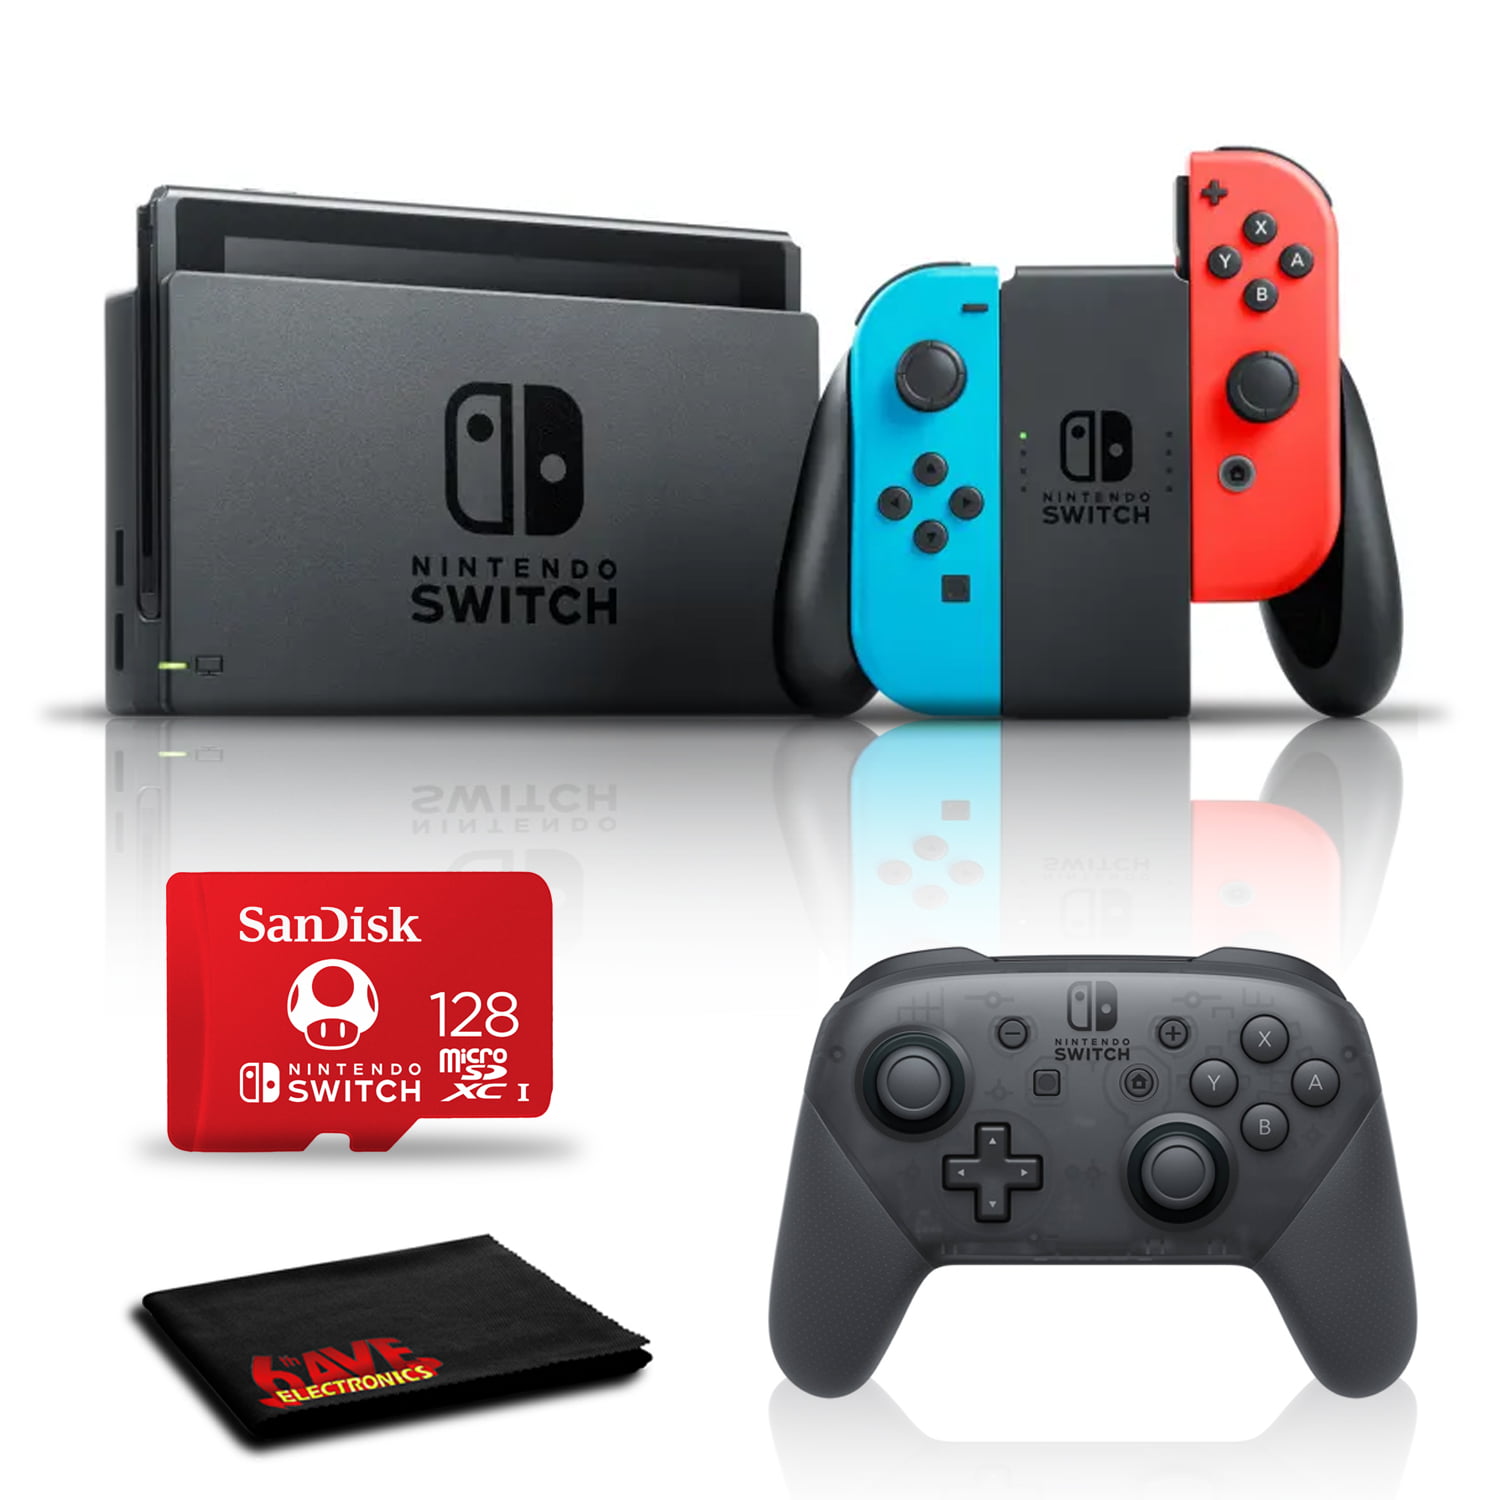 Nintendo Switch (Neon Blue/Red) with 128GB microSD and Switch Pro Controller